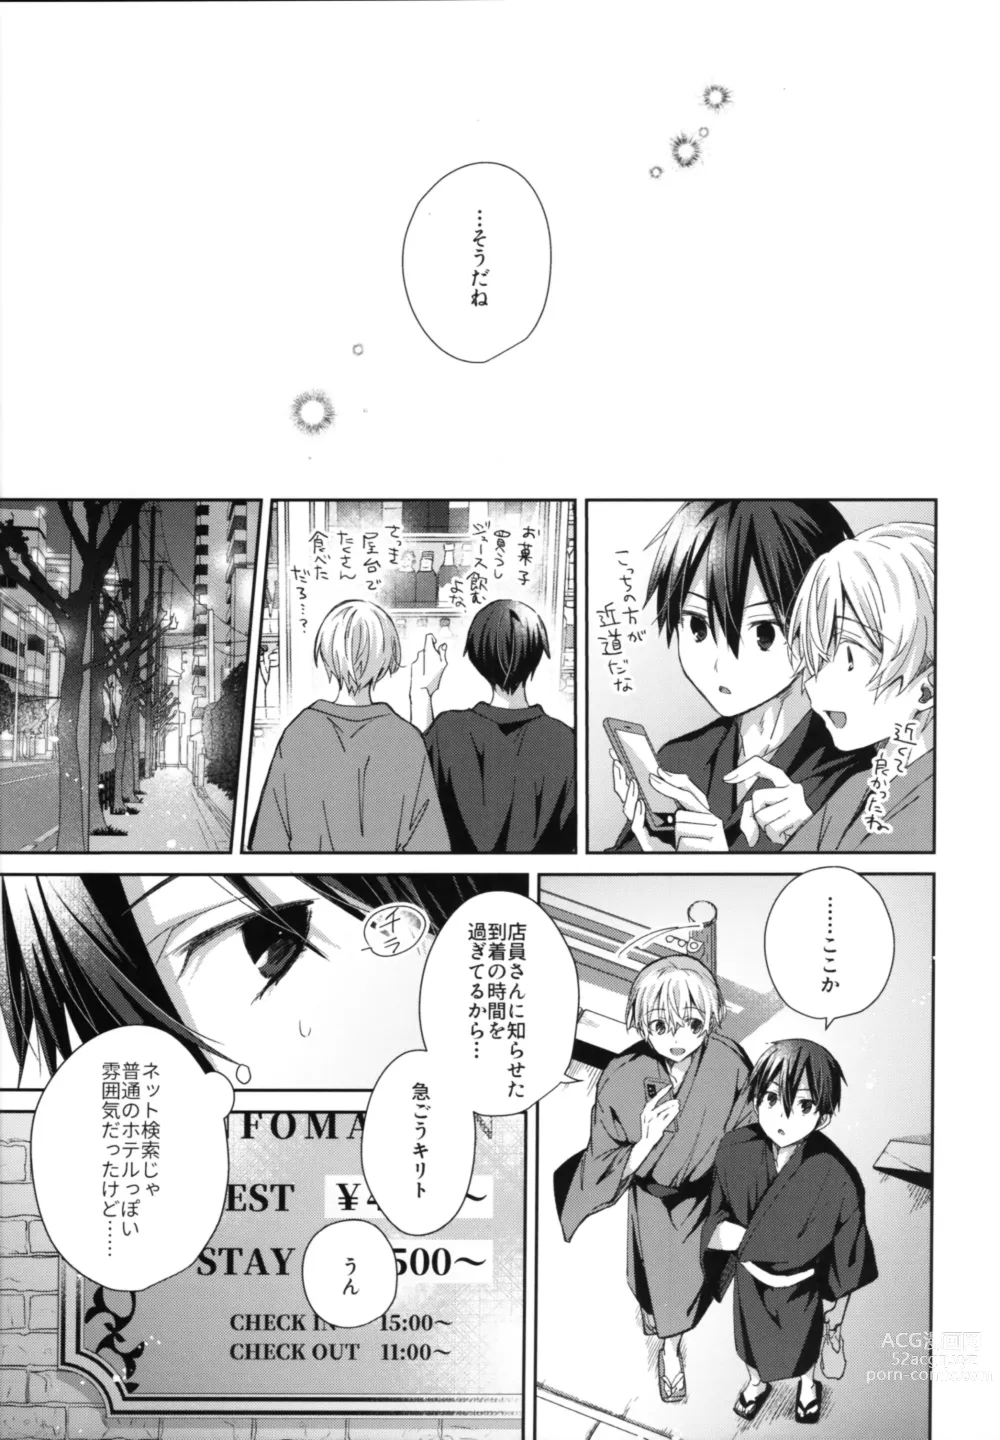 Page 6 of doujinshi Adolescent Summer